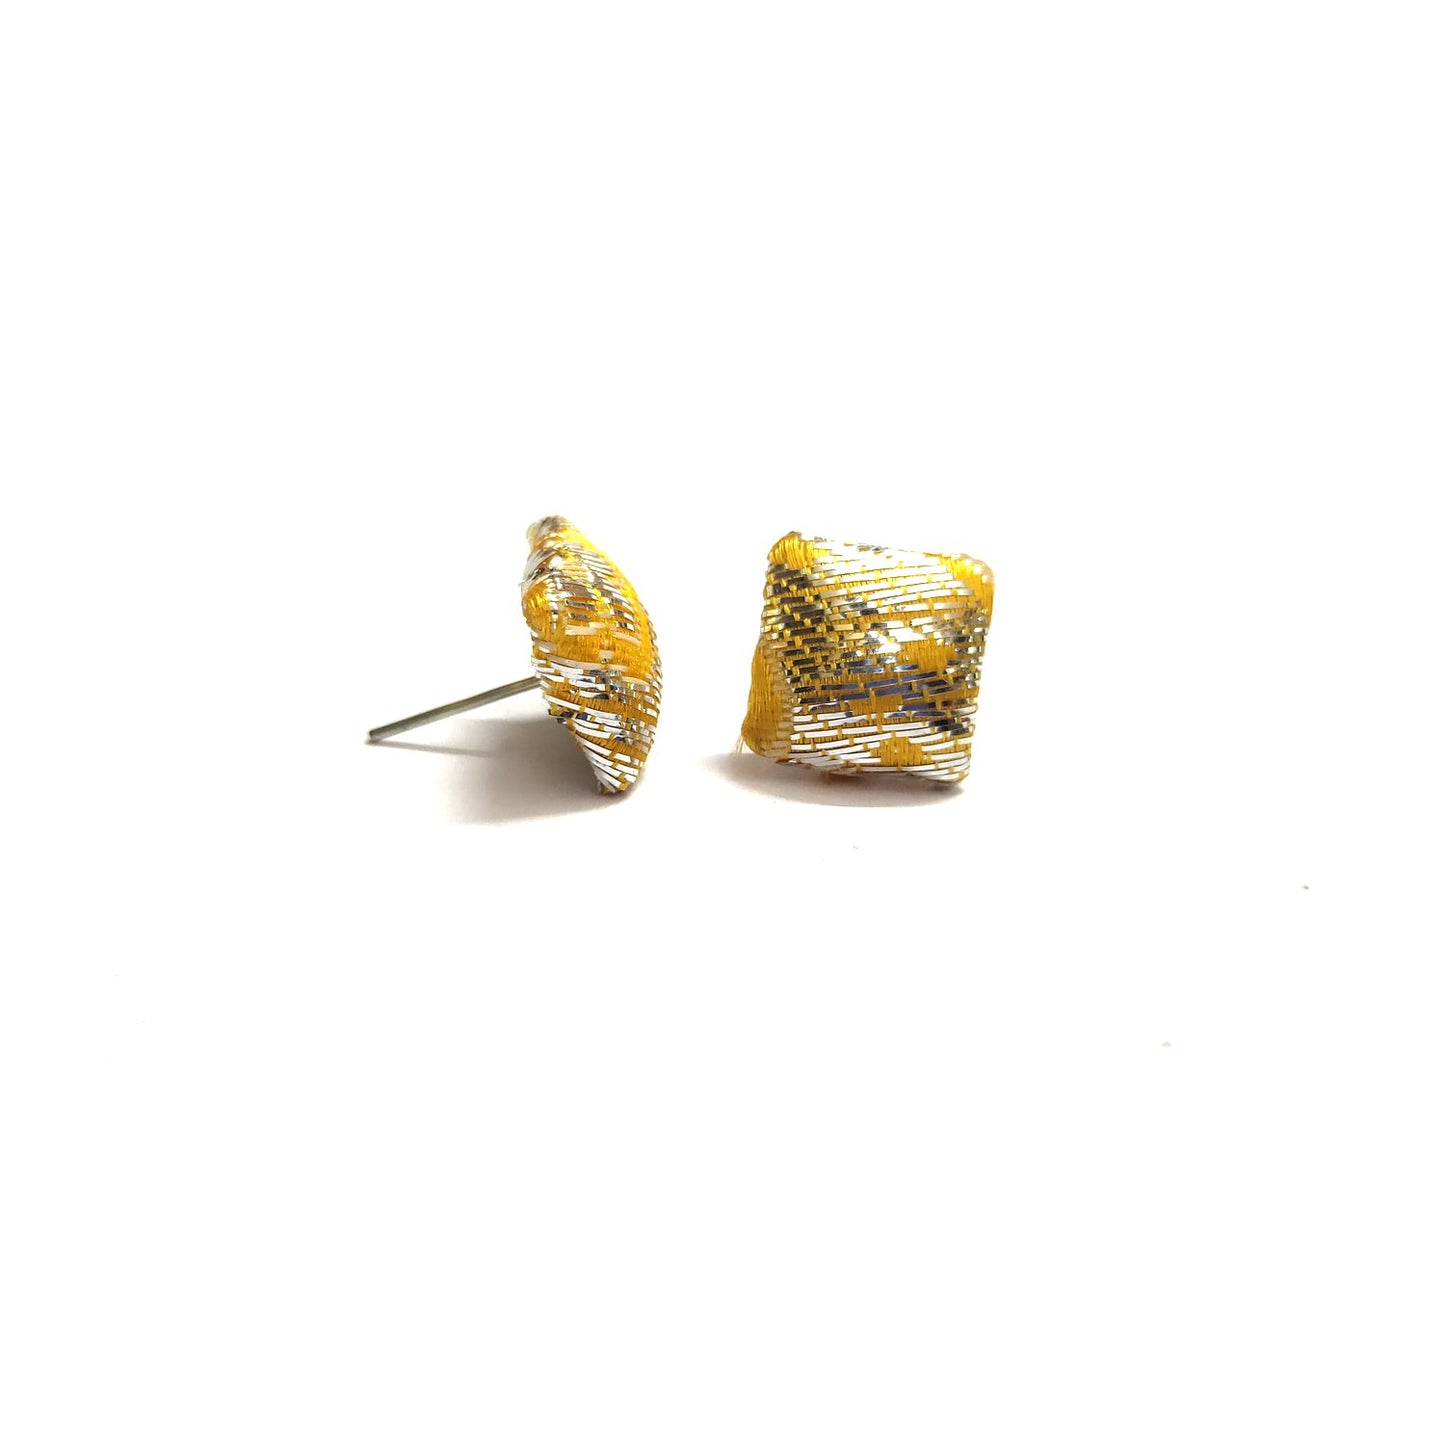 Anokhi Ada Fancy Small Square Shaped Stud Earrings for Girls ( Yellow, AS-09B )